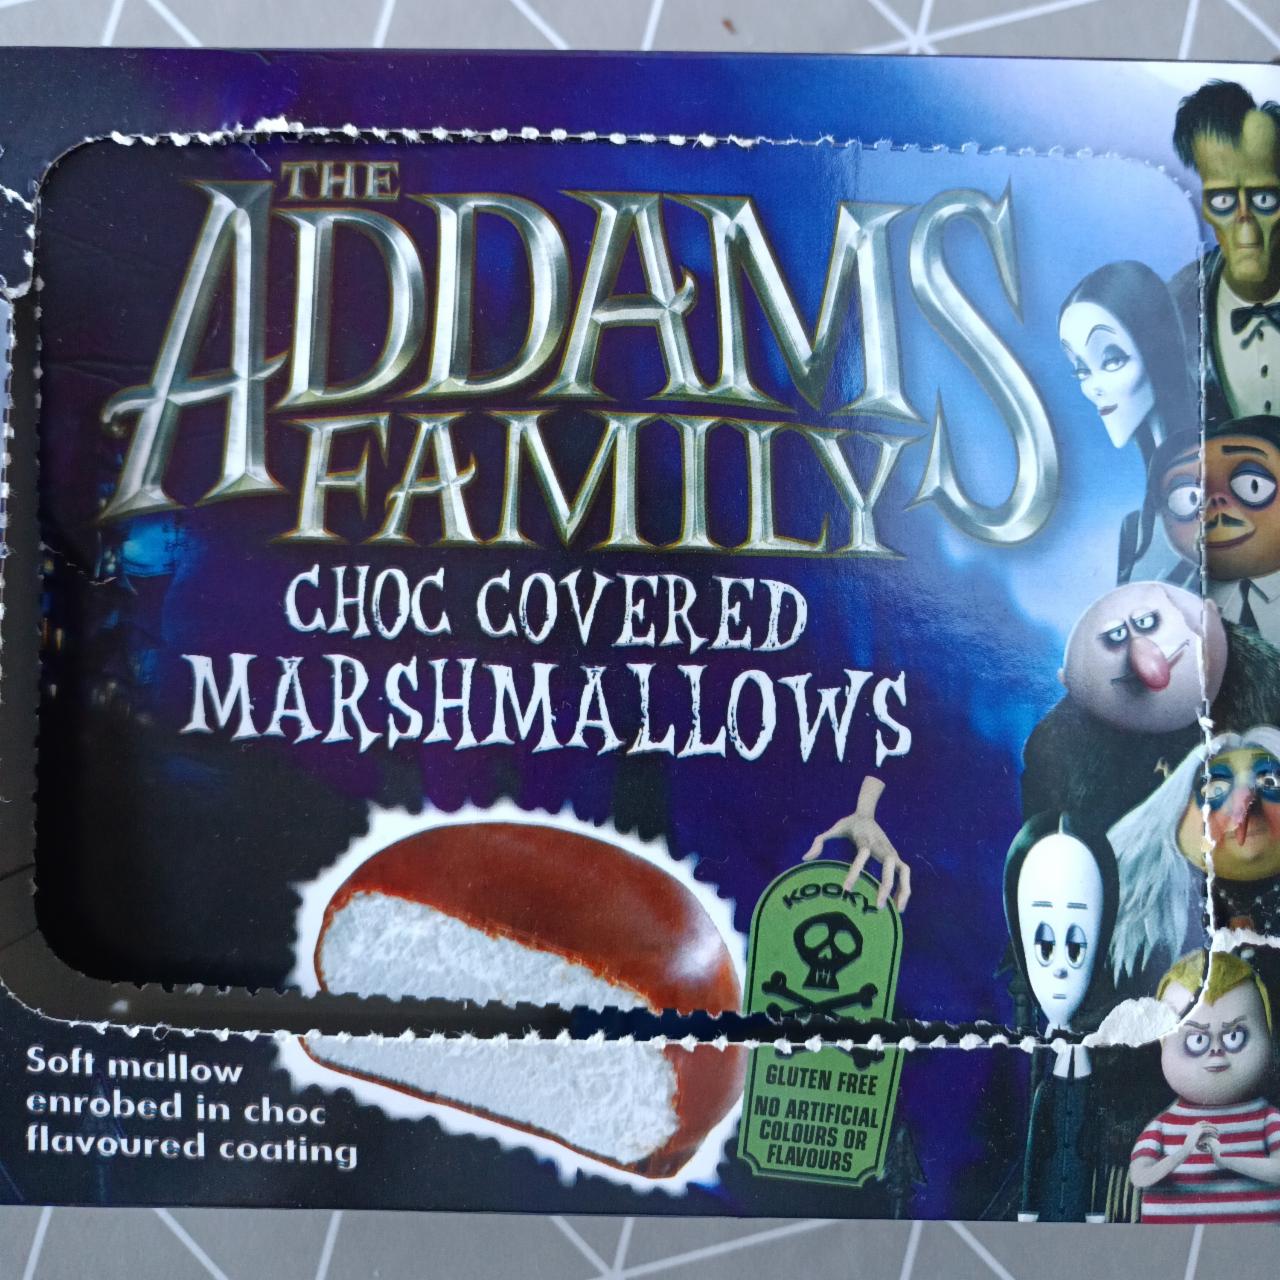 Fotografie - The Addams Family Choc covered Marshmallows